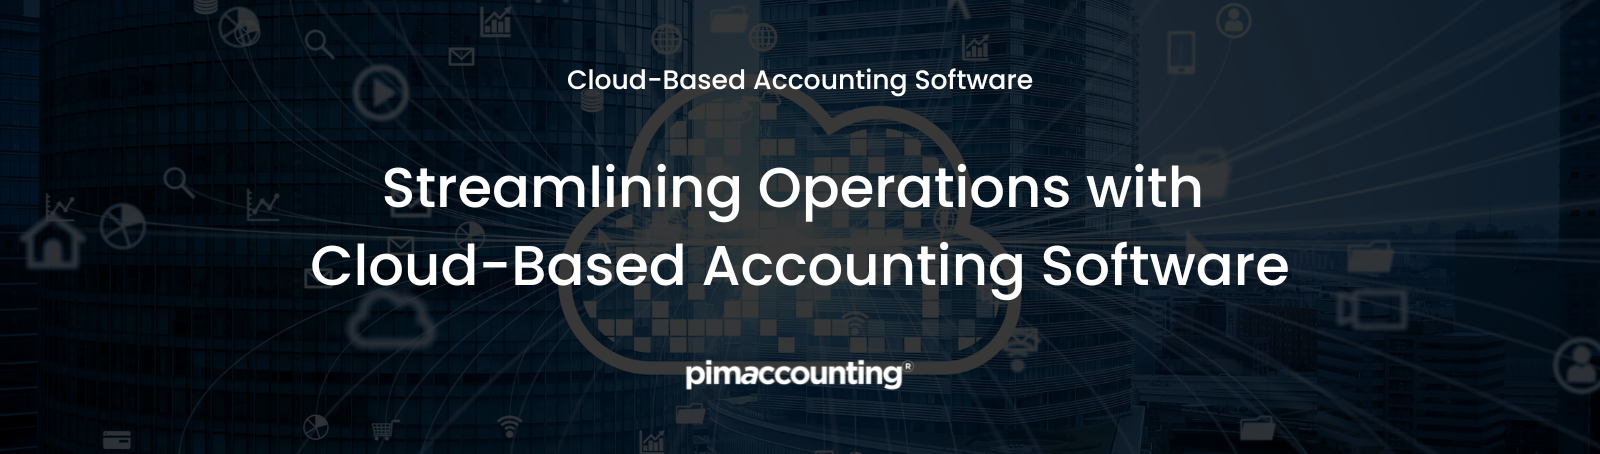 Streamlining Operations with Cloud-Based Accounting Software